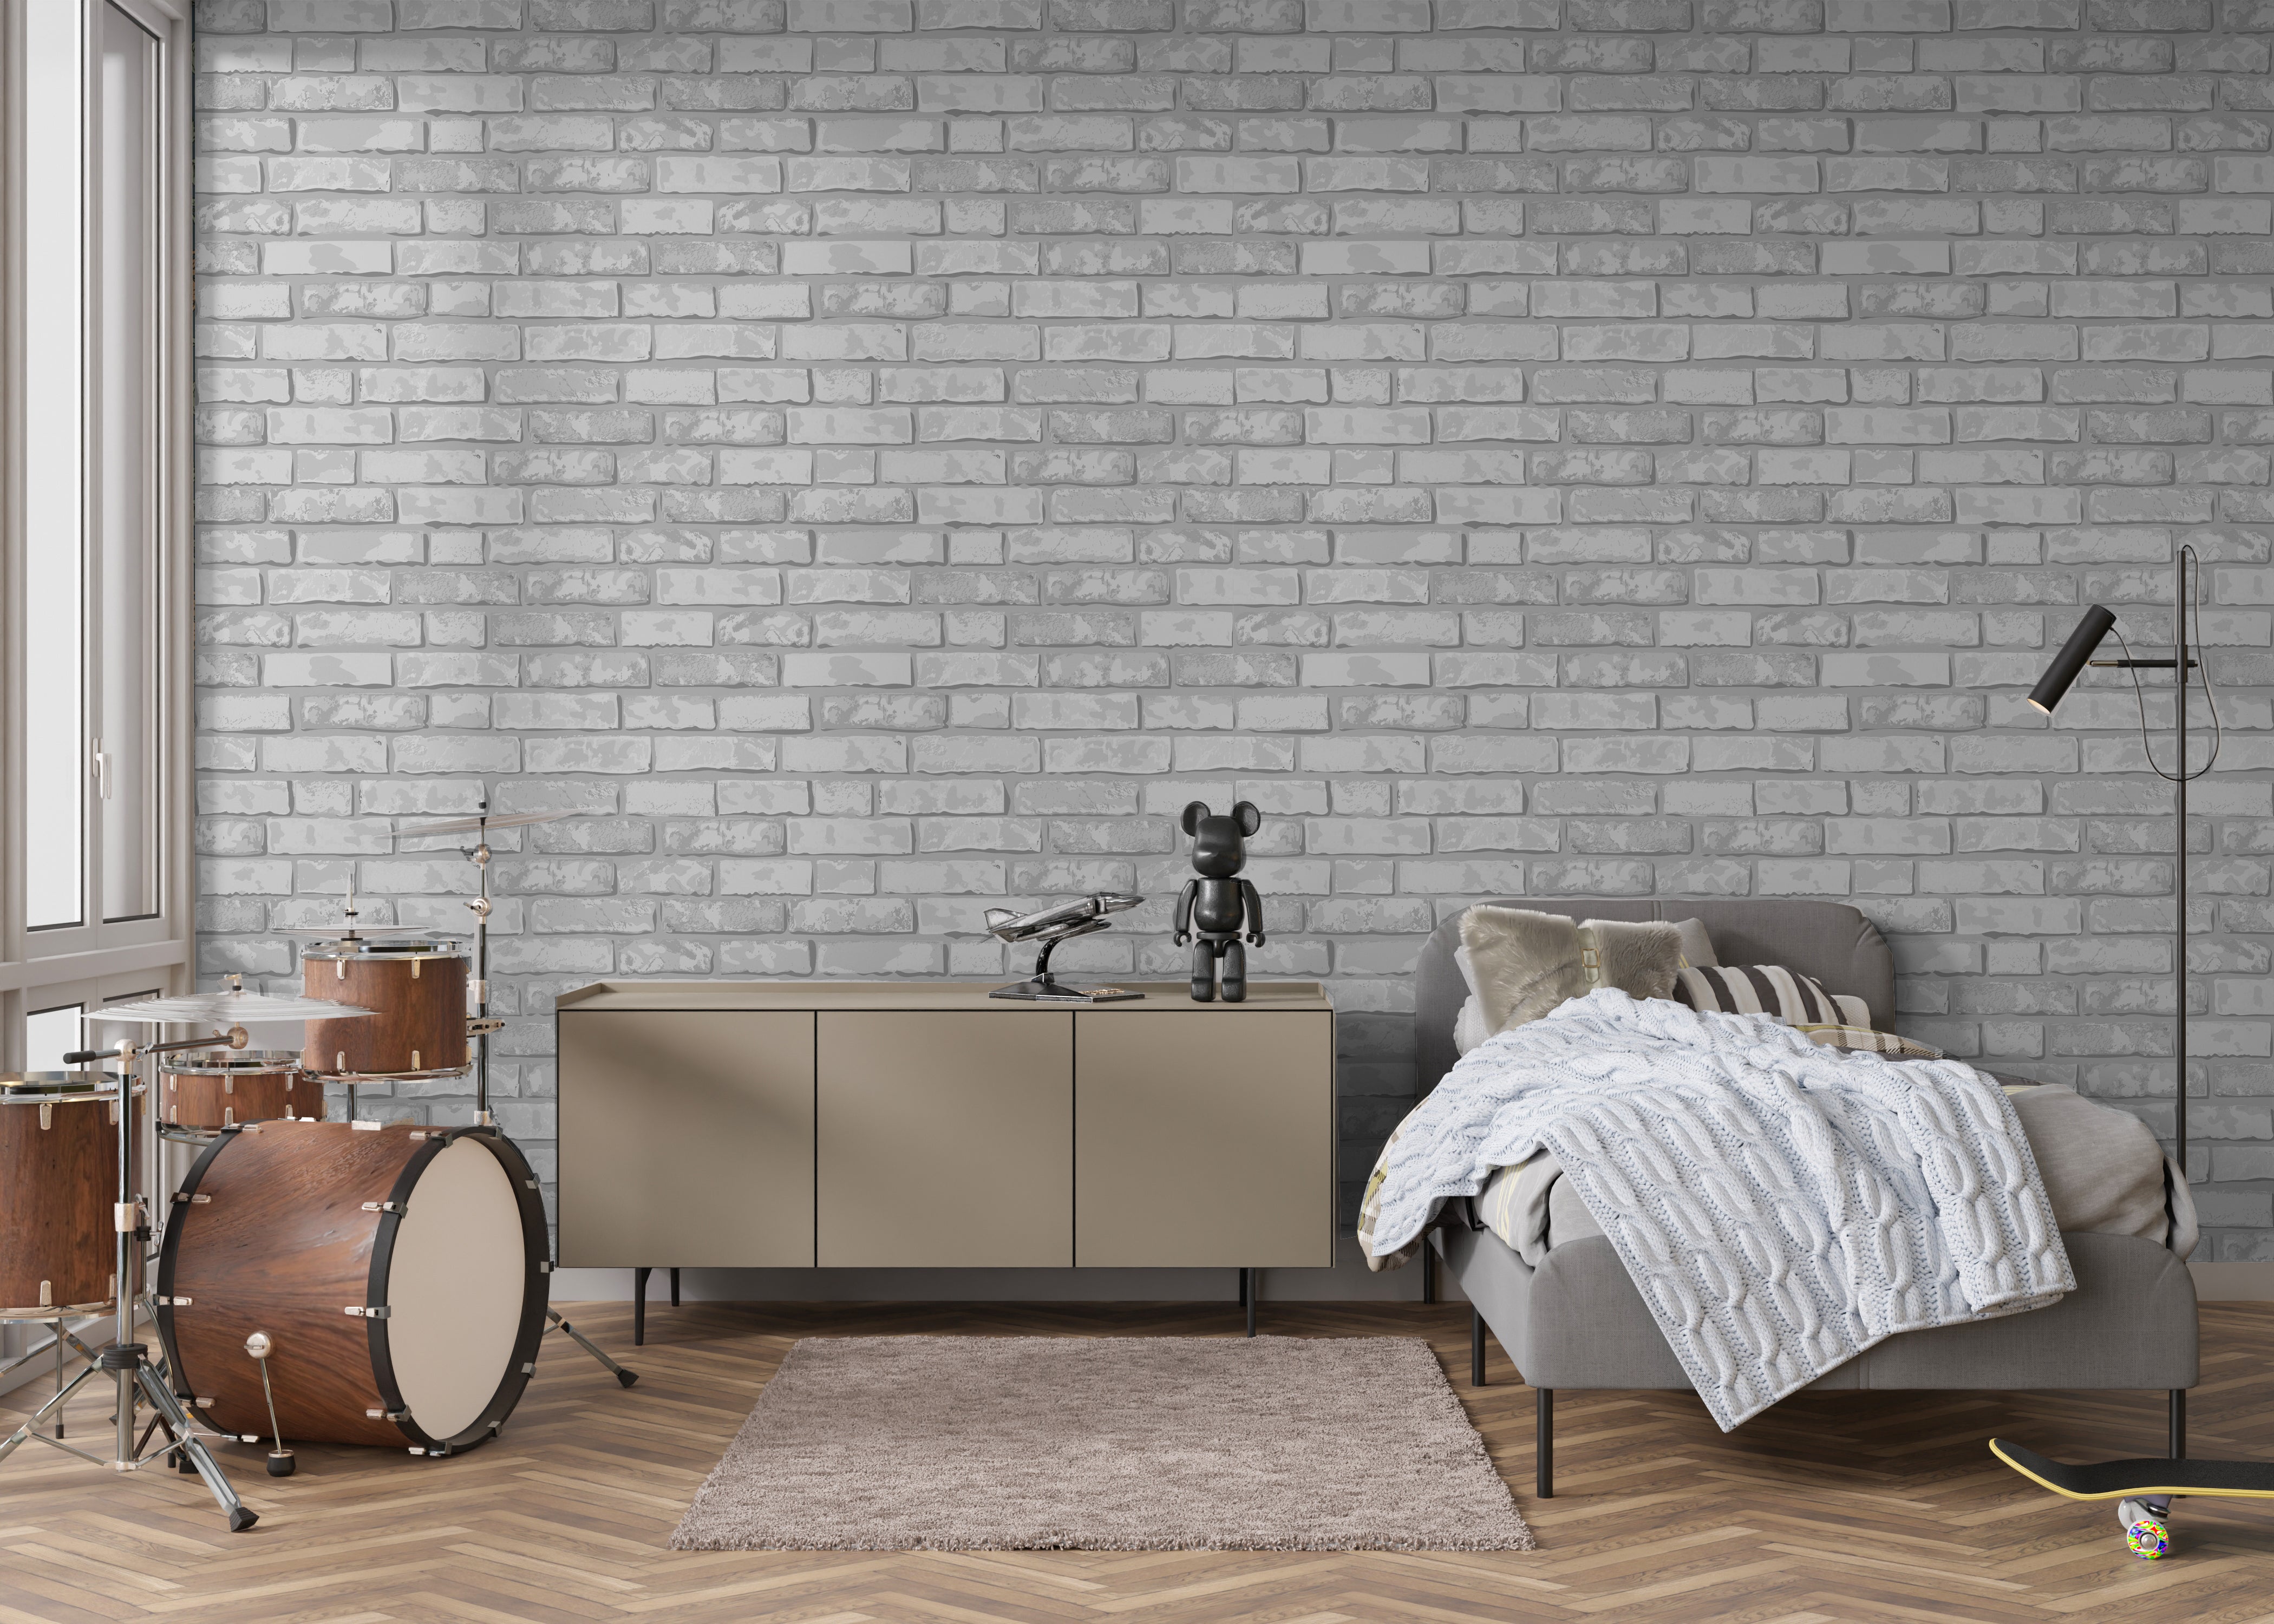 Aged Brick Effect Wall Mural  White Washed Brick